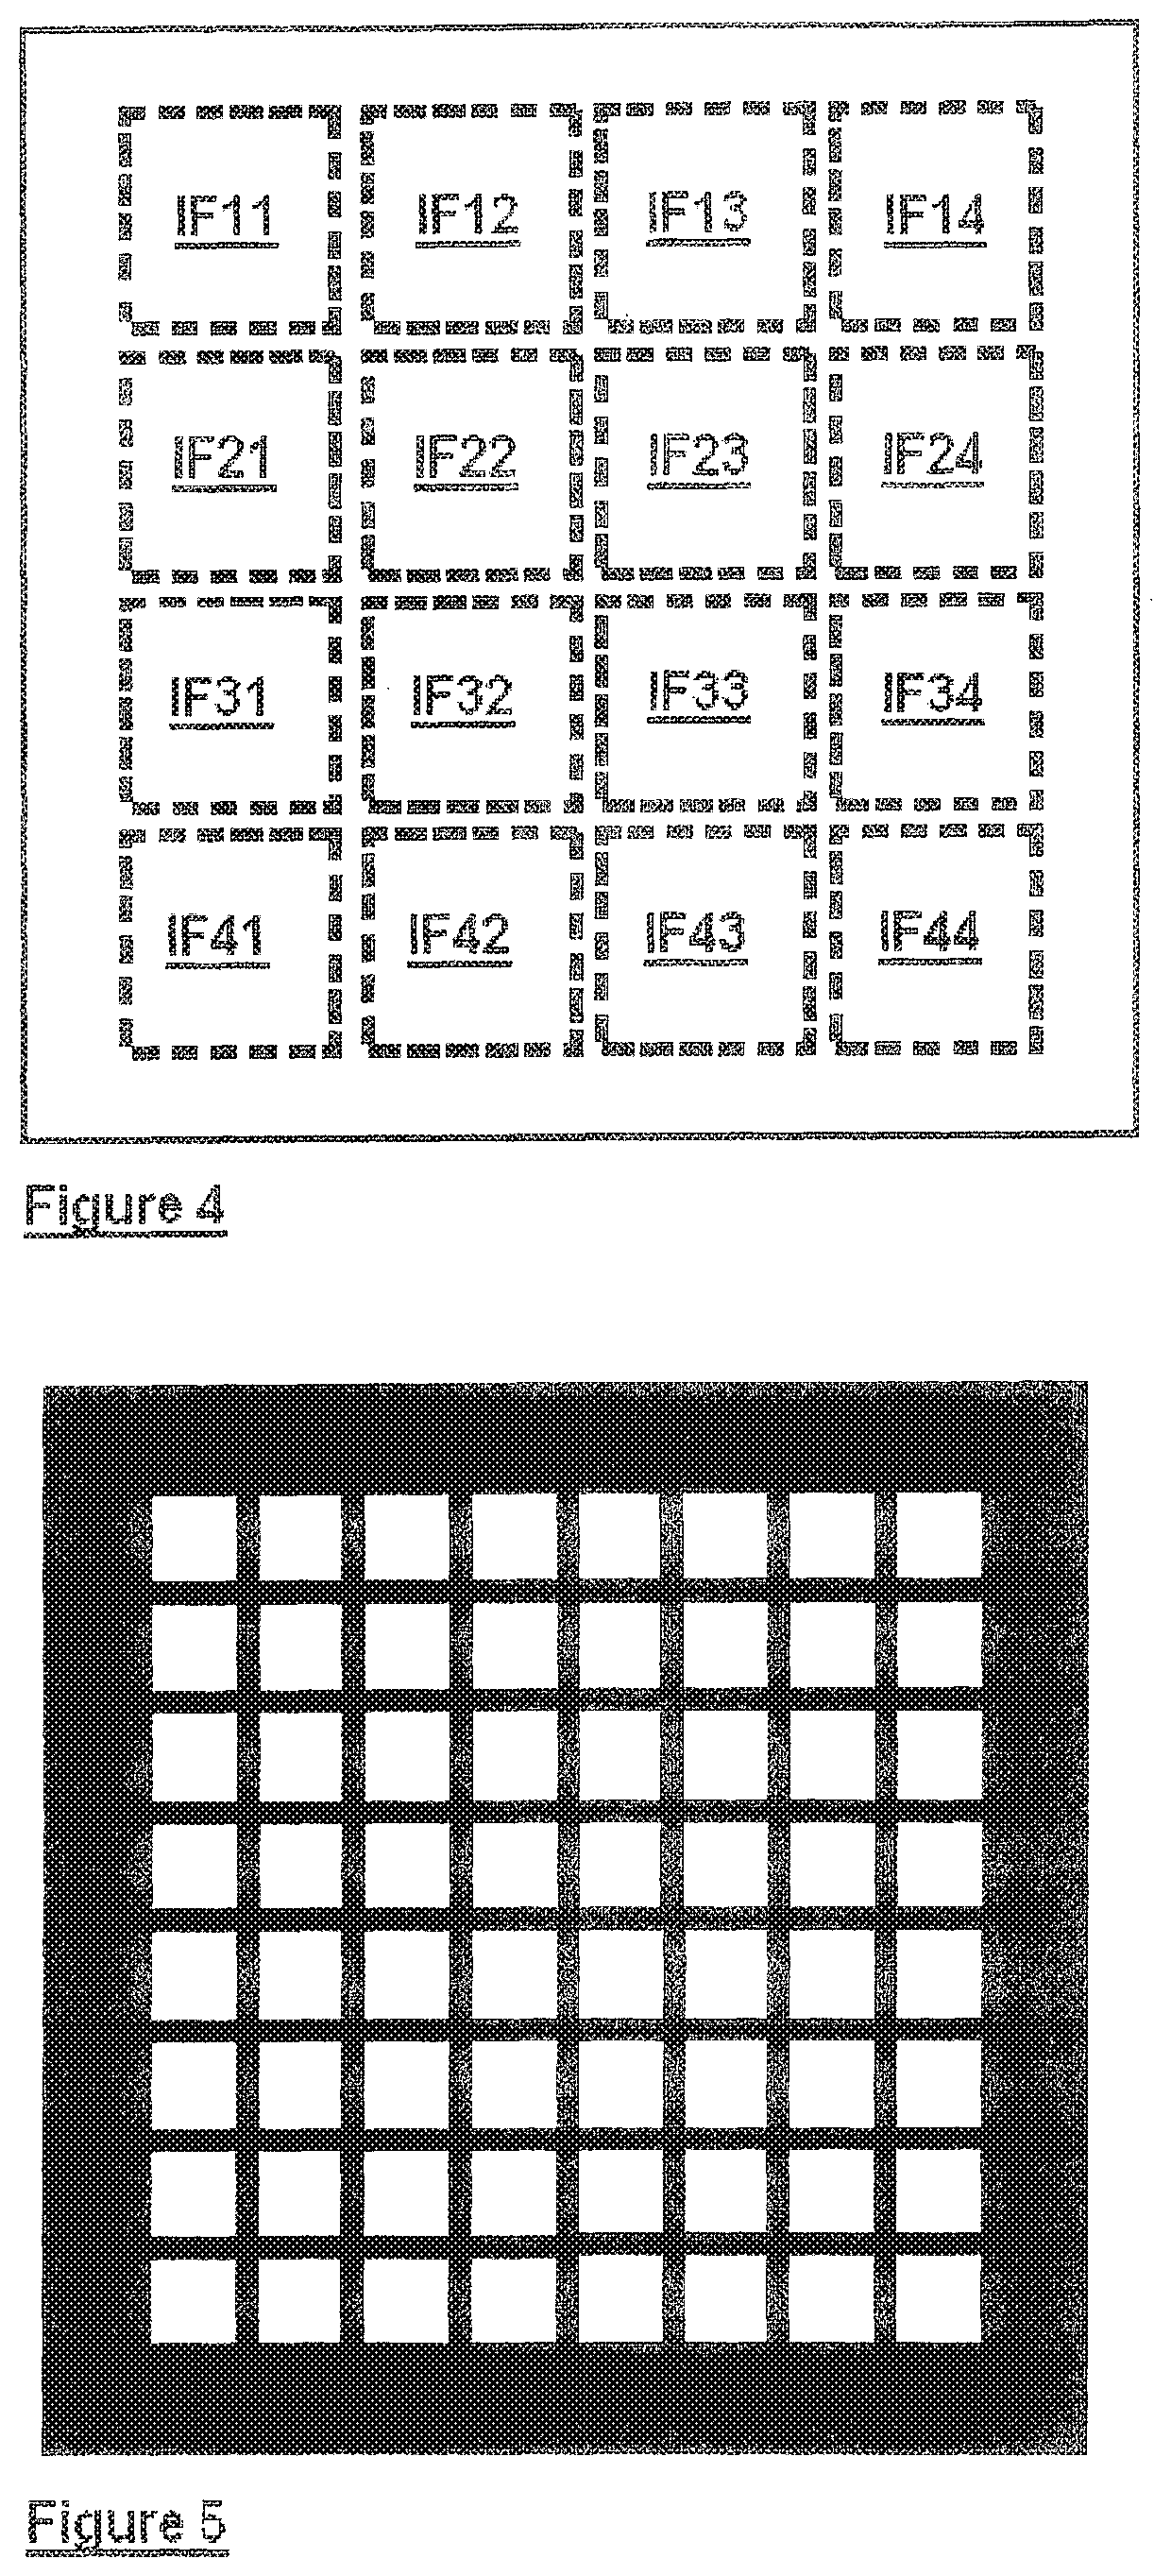 Multispectral imaging device with array of microlenses